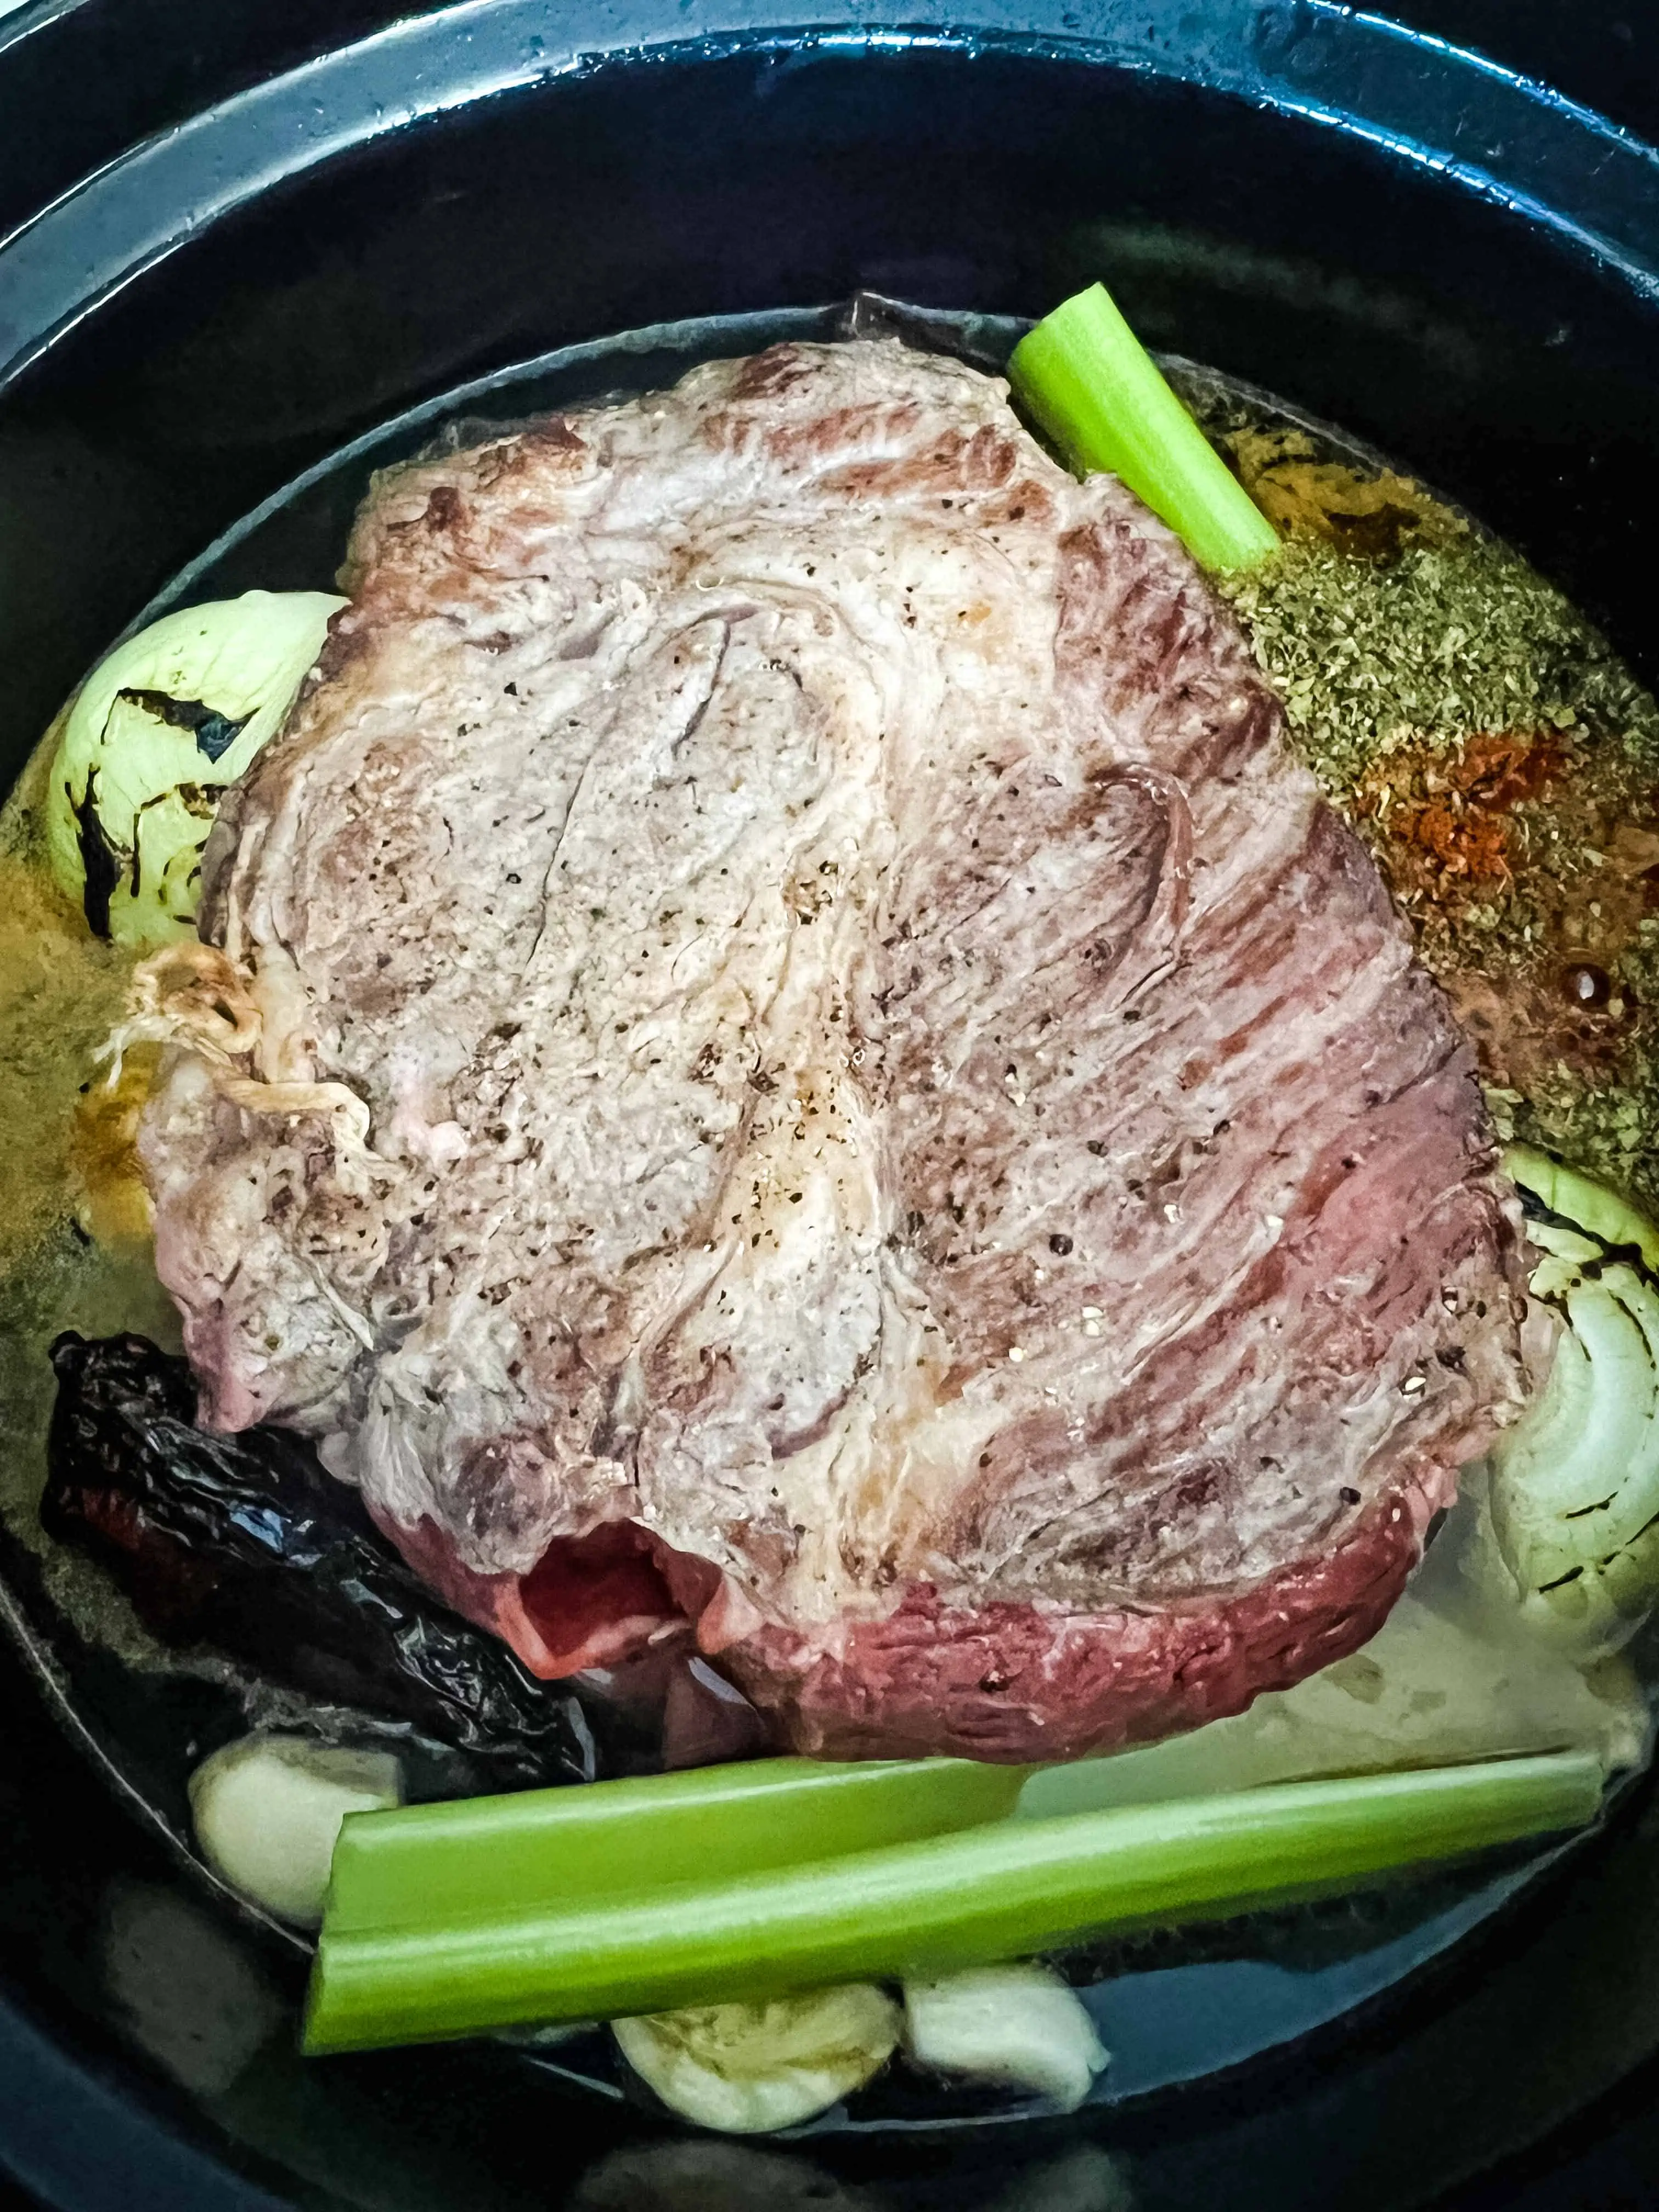 beef, vegetables, chilis and broth in the dutch oven ready for braising.